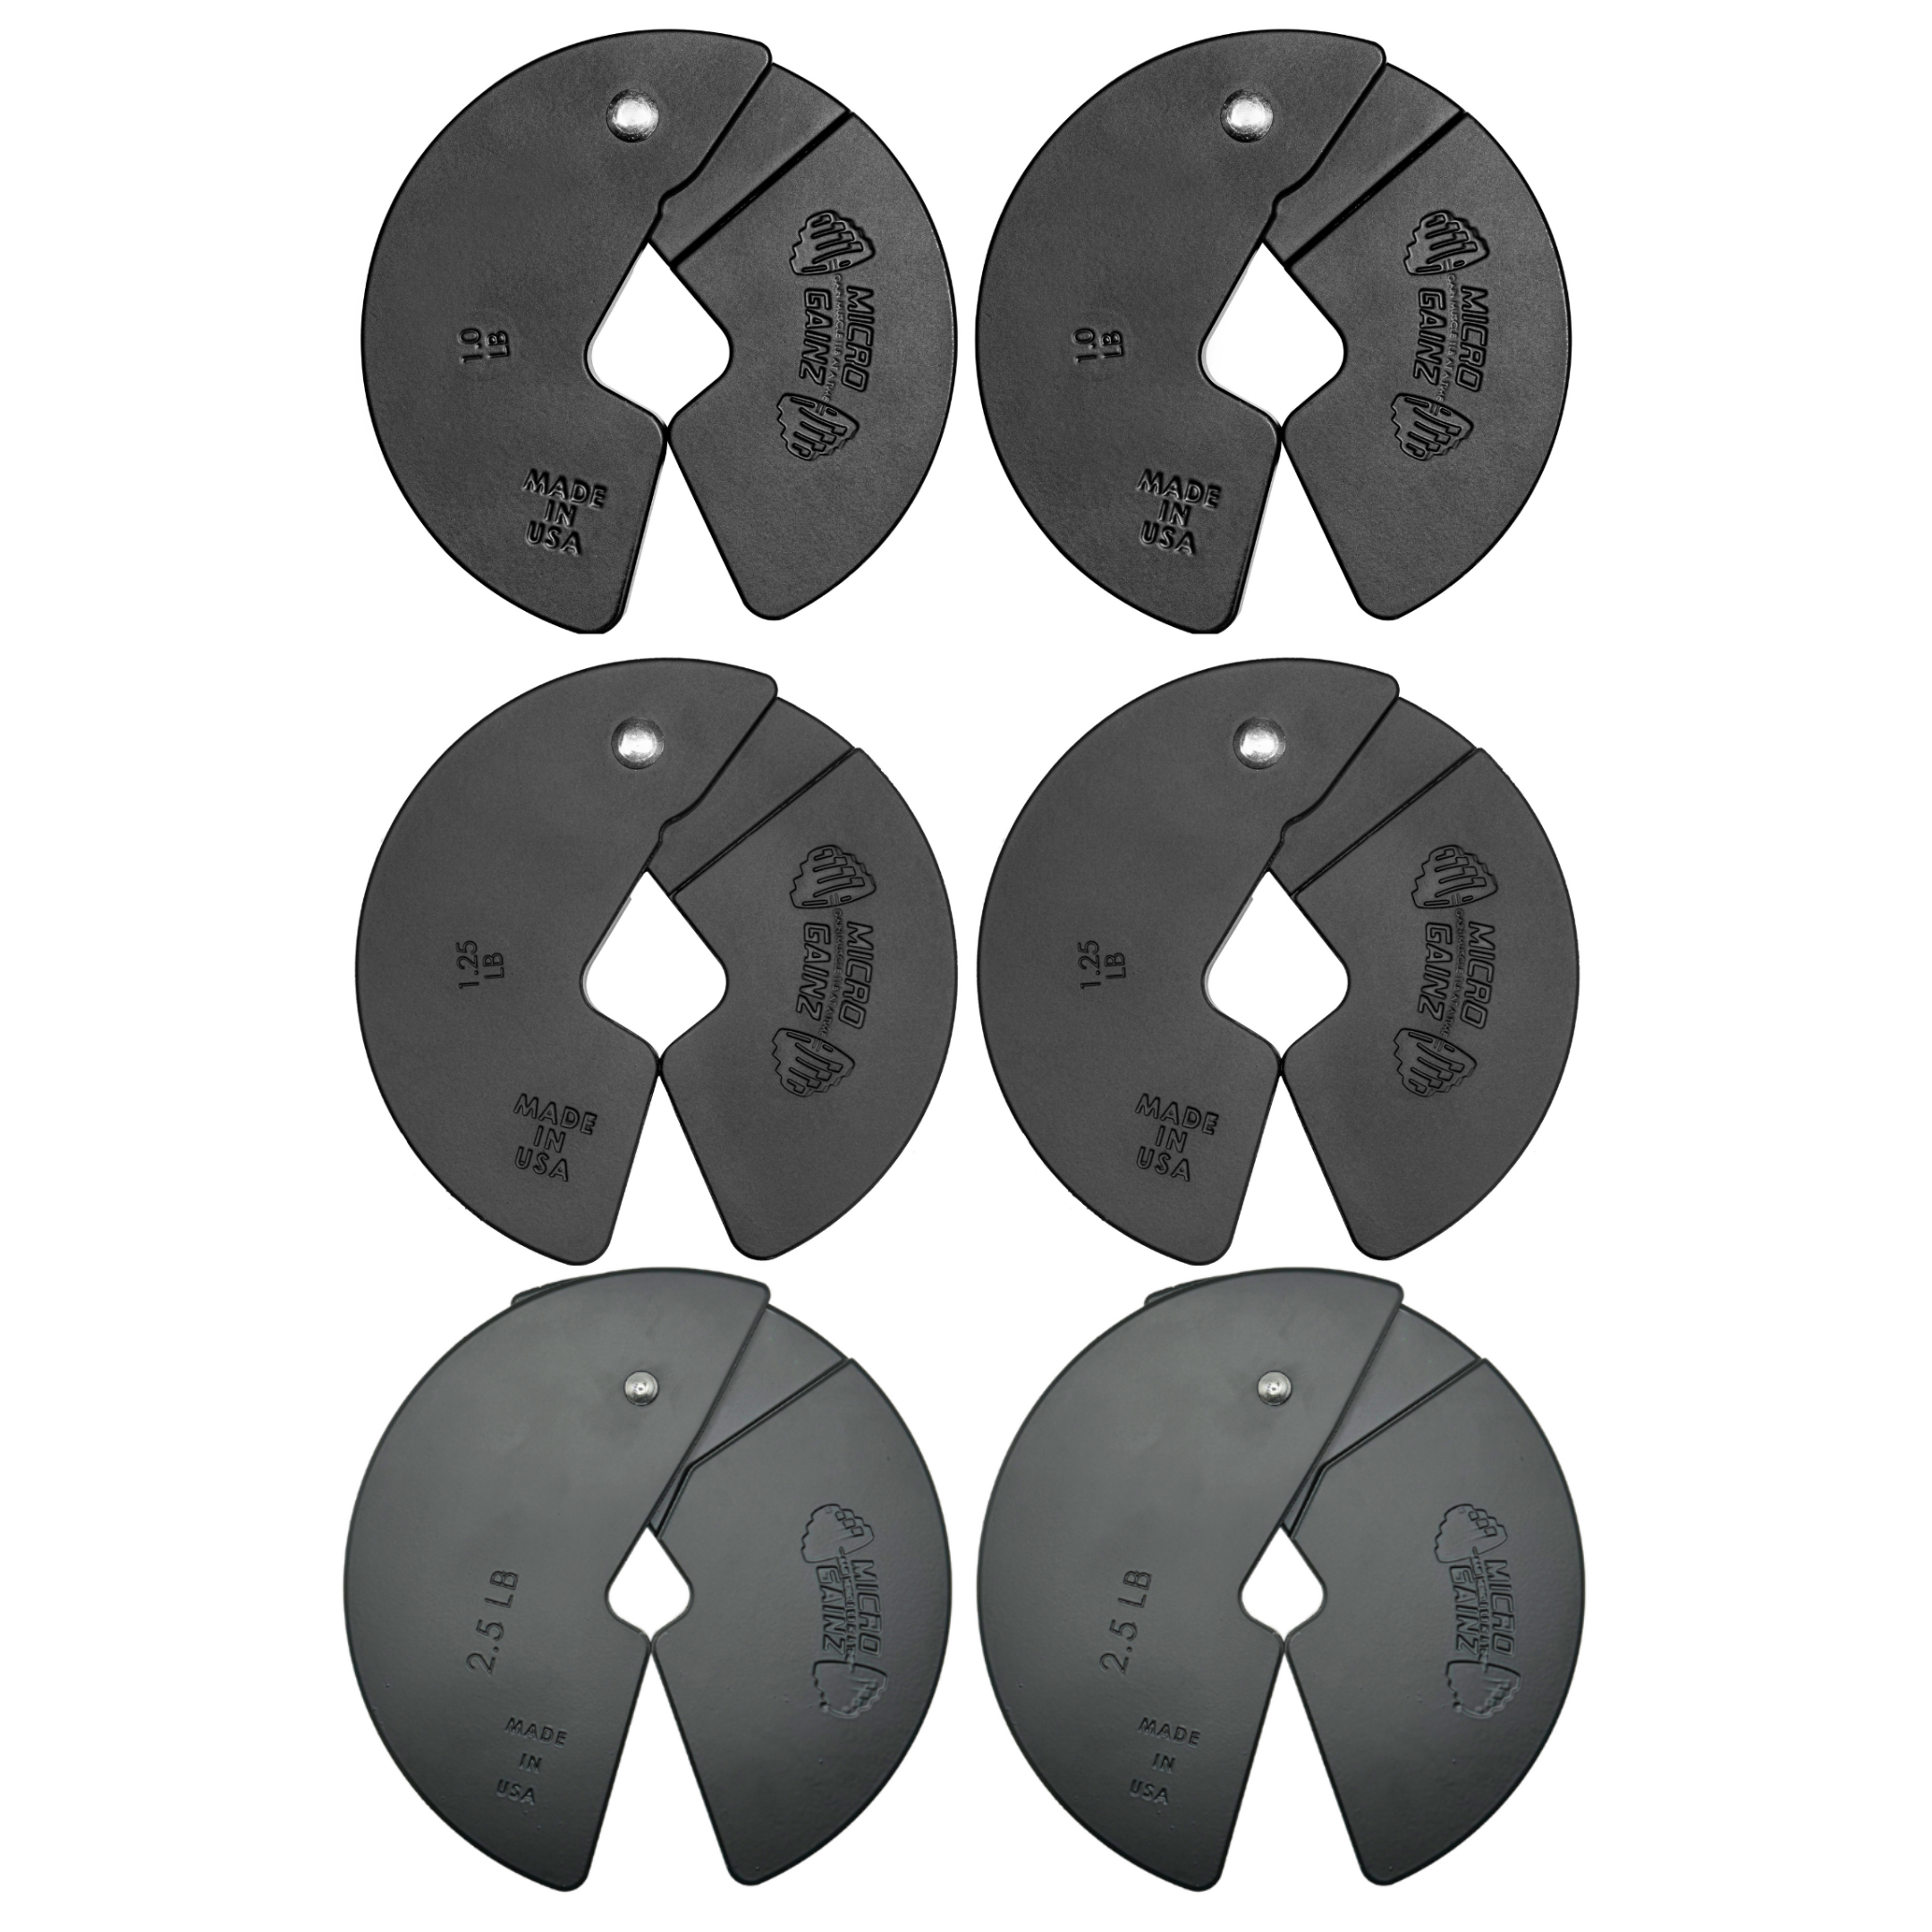 Micro Gainz Triple Pack of 1LB, 1.25LB, & 2.5LB Dumbbell Fractional Weight Plates